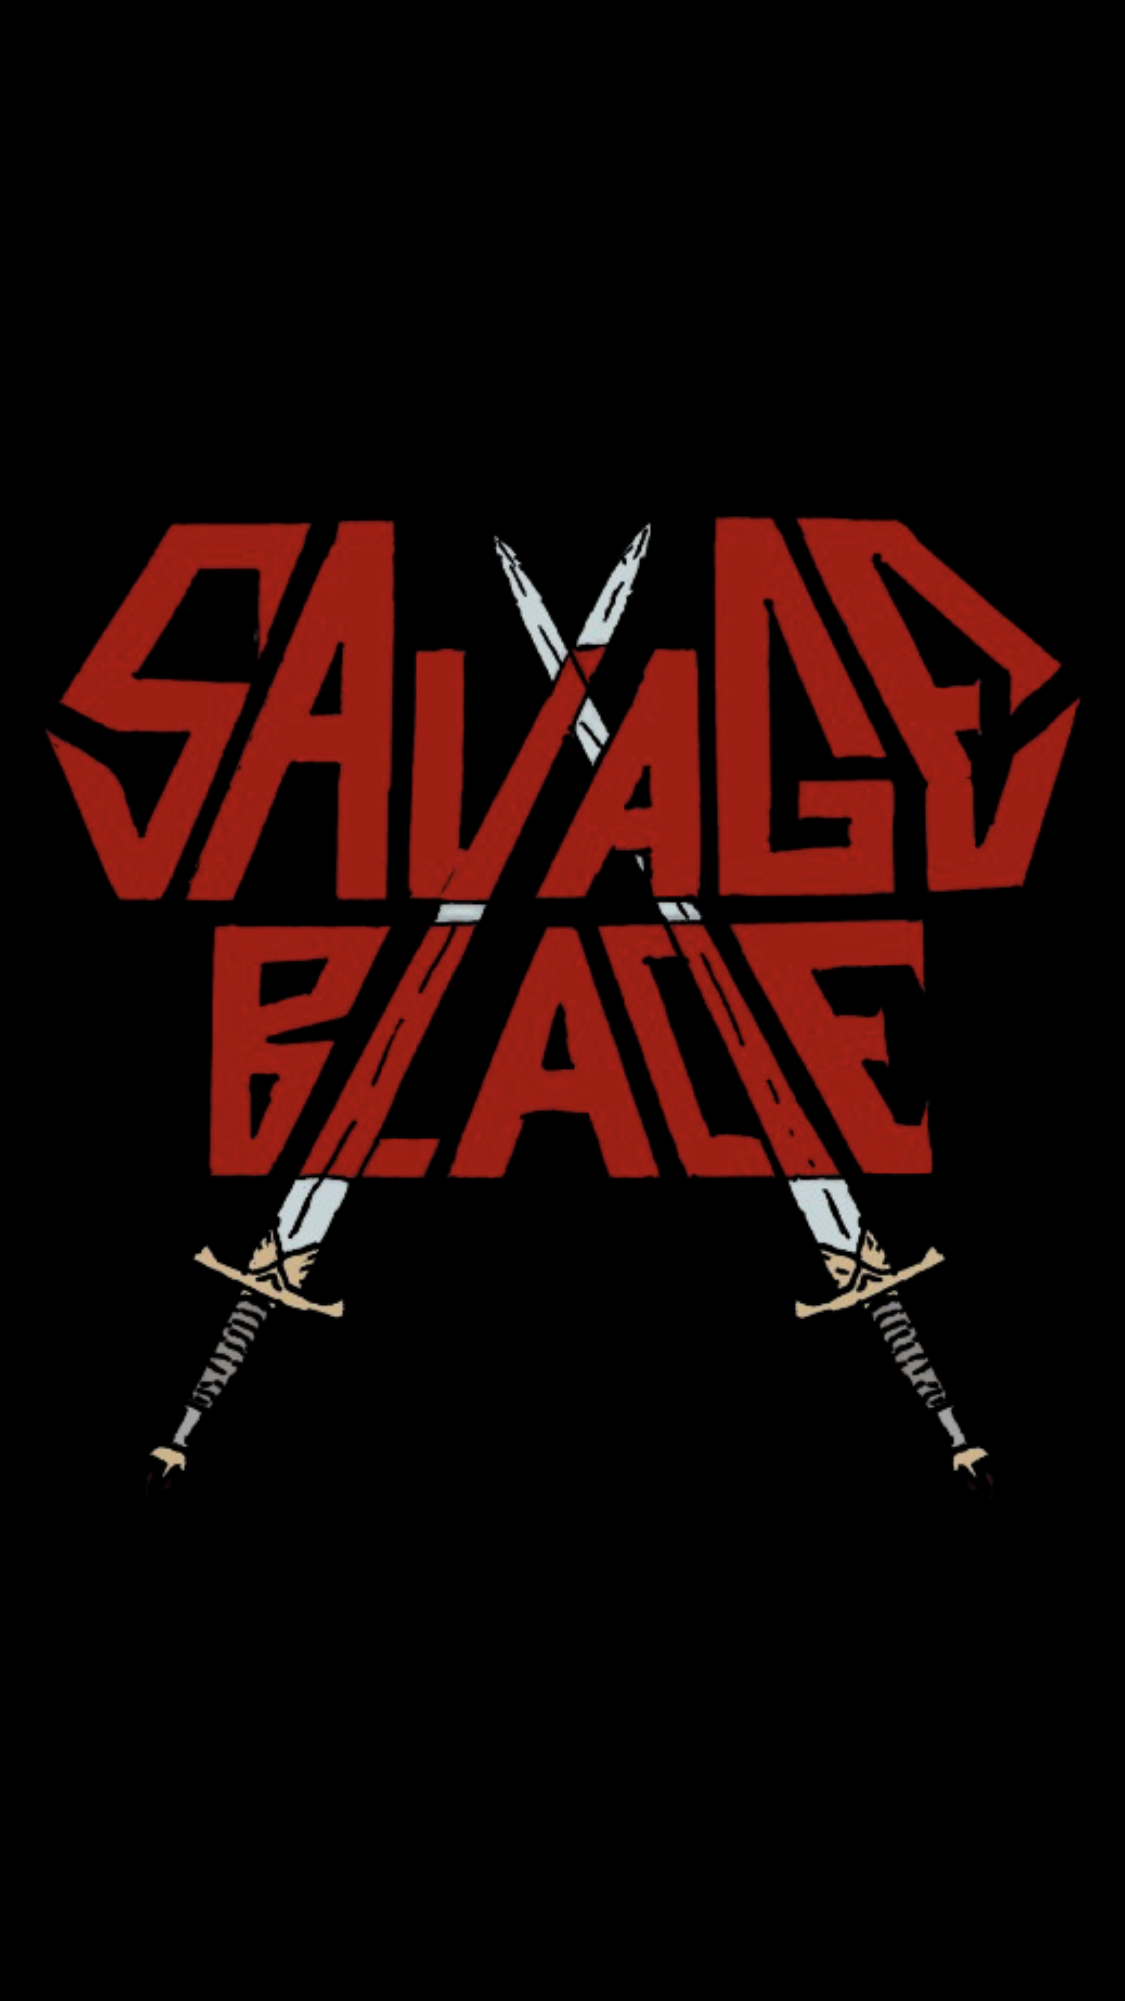 Interview with SAVAGE BLADE